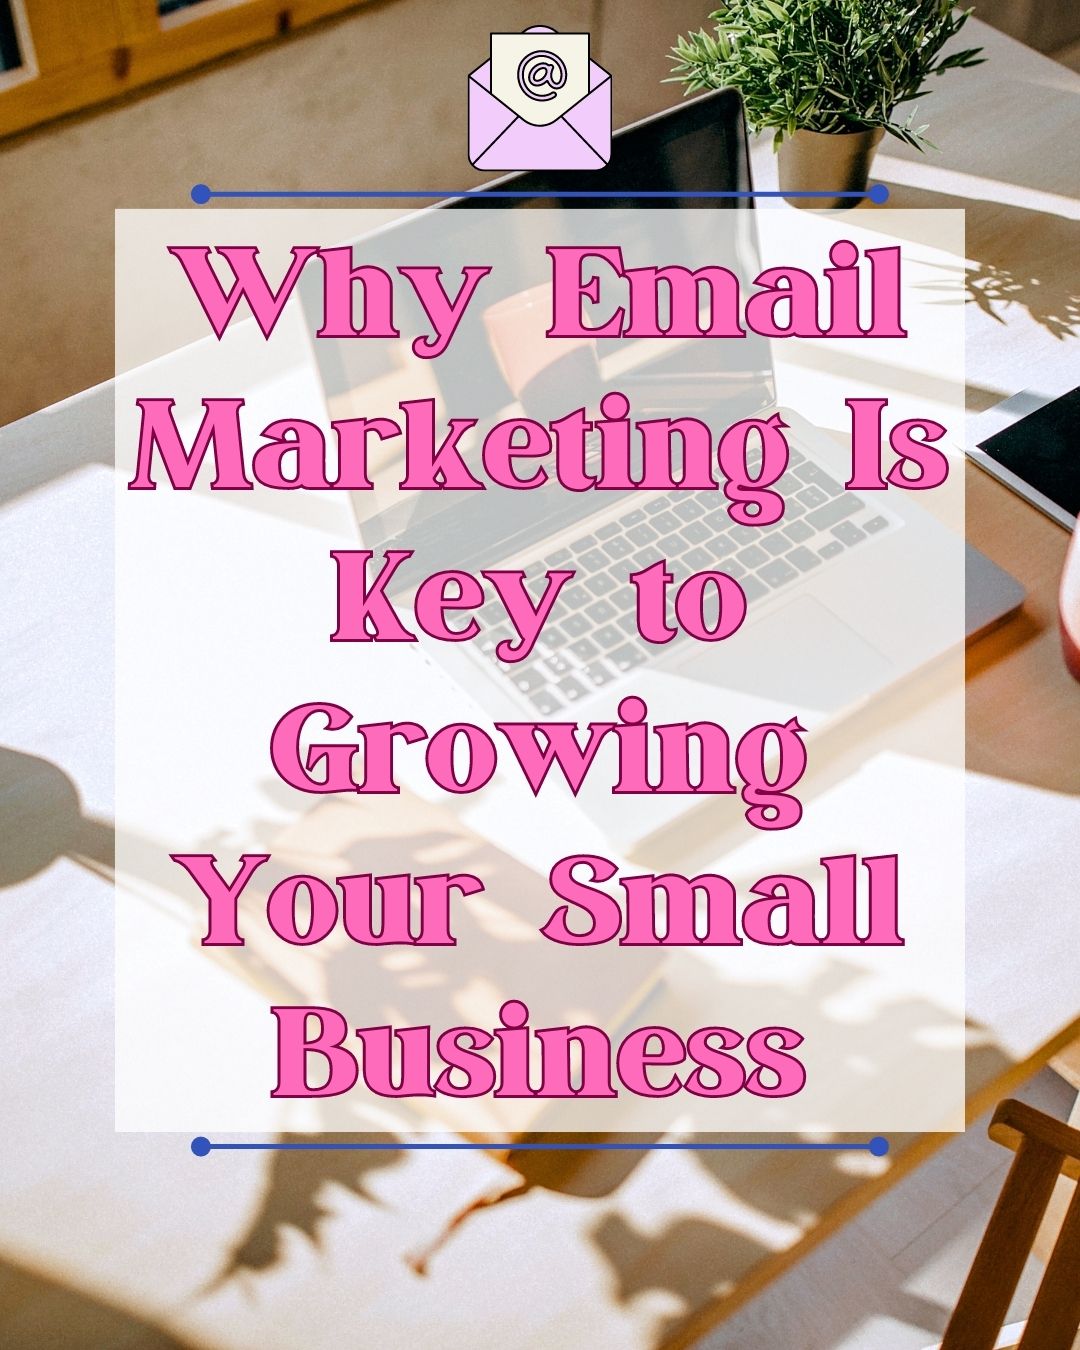 Why Email Marketing Is Key to Growing Your Small Business